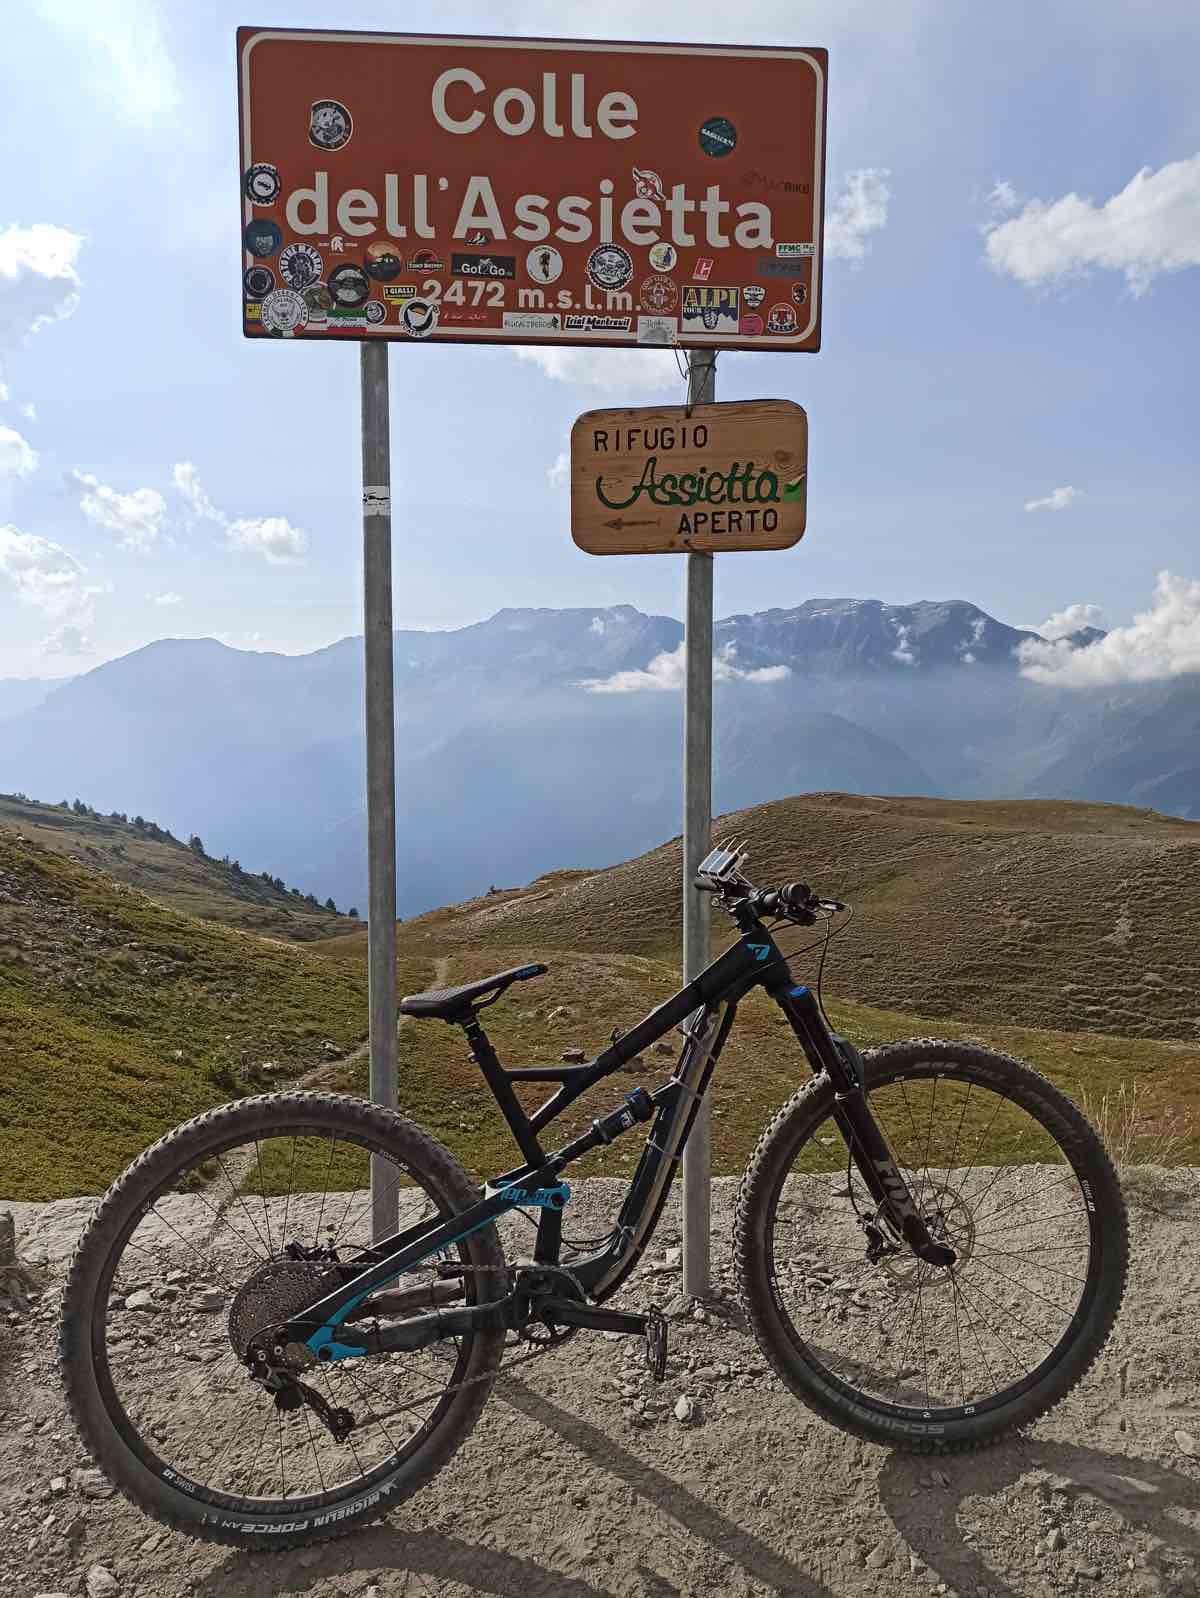 bikerumor pic of the day a mountain bike is next to a sign that says Colle dell'Assietta and a sign for a refugio on the top of a mountain pass in the alps, the mountains in the distance are covered by clouds.